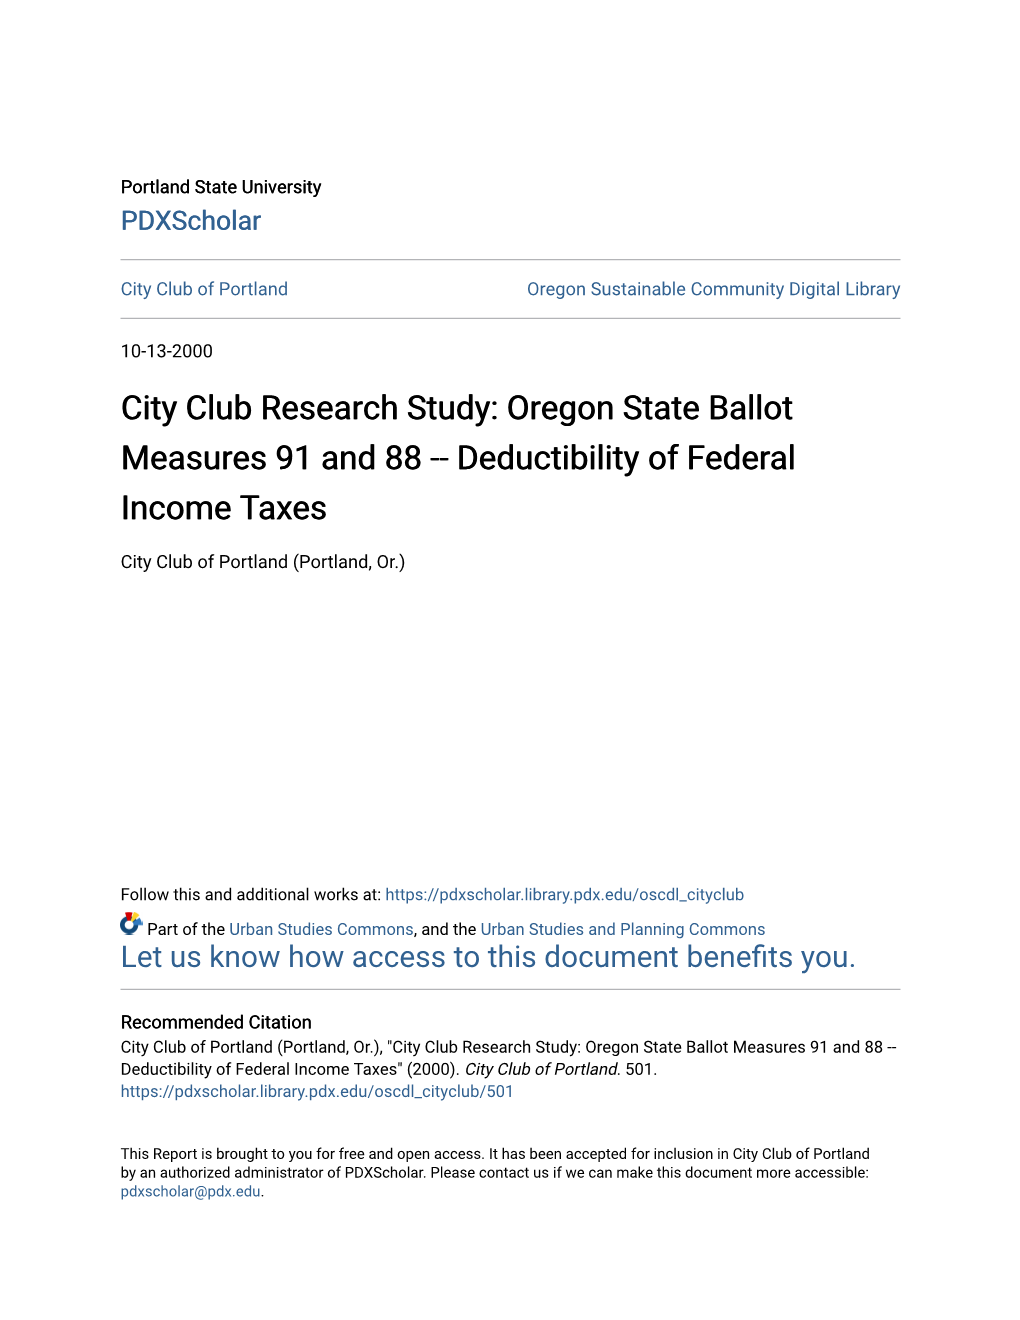 Deductibility of Federal Income Taxes